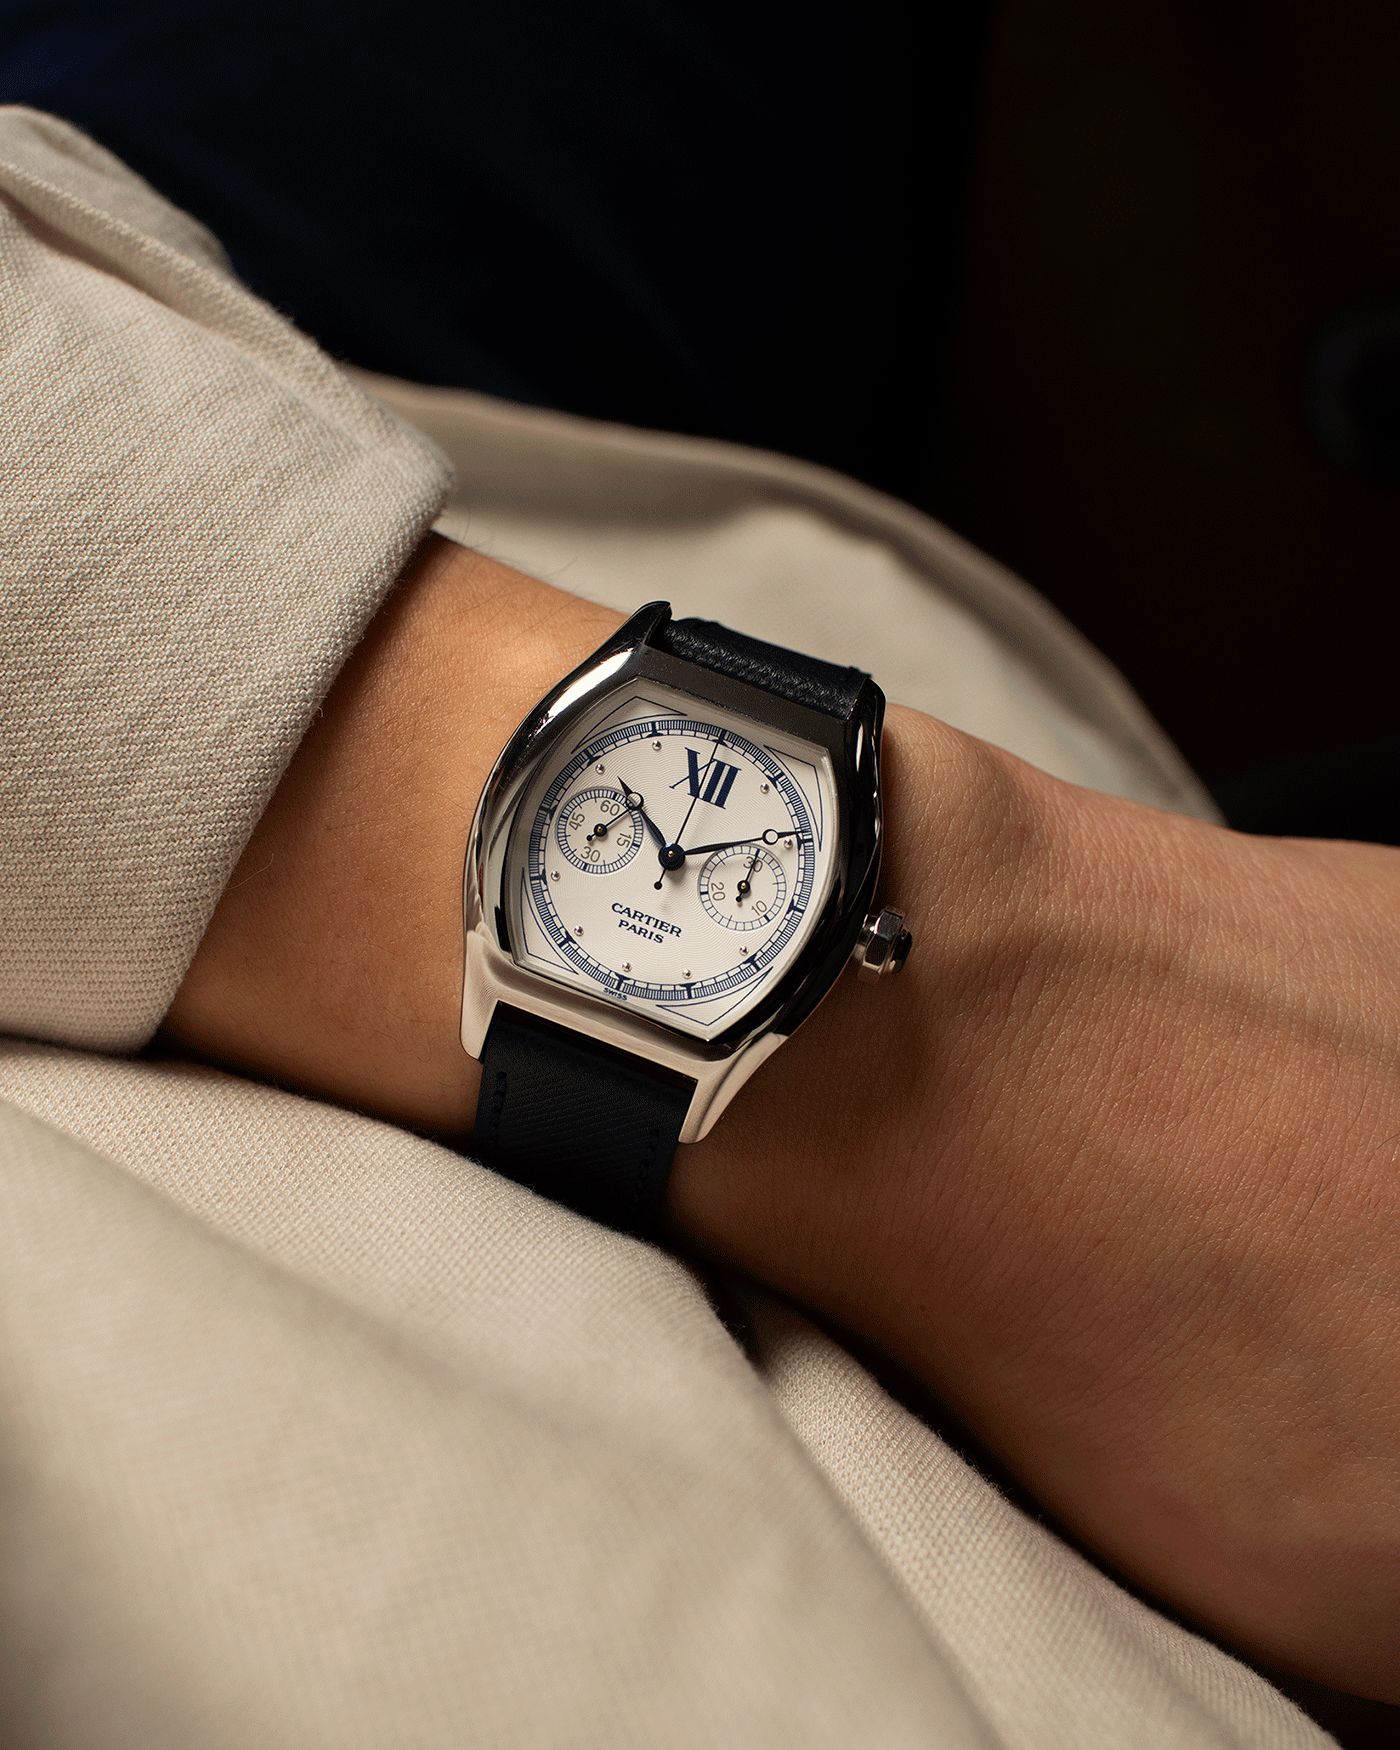 Brand: Cartier Year: 2000’s Model: CPCP Collection Prive Tortue Monopoussoir Reference: 2356 Material: 18k White Gold Movement: THA Cal. 045MC Case Diameter: 43 x 35 mm Strap: Navy Blue Molequin Textured Calf Strap with separate 18k Cartier White Gold Deployant